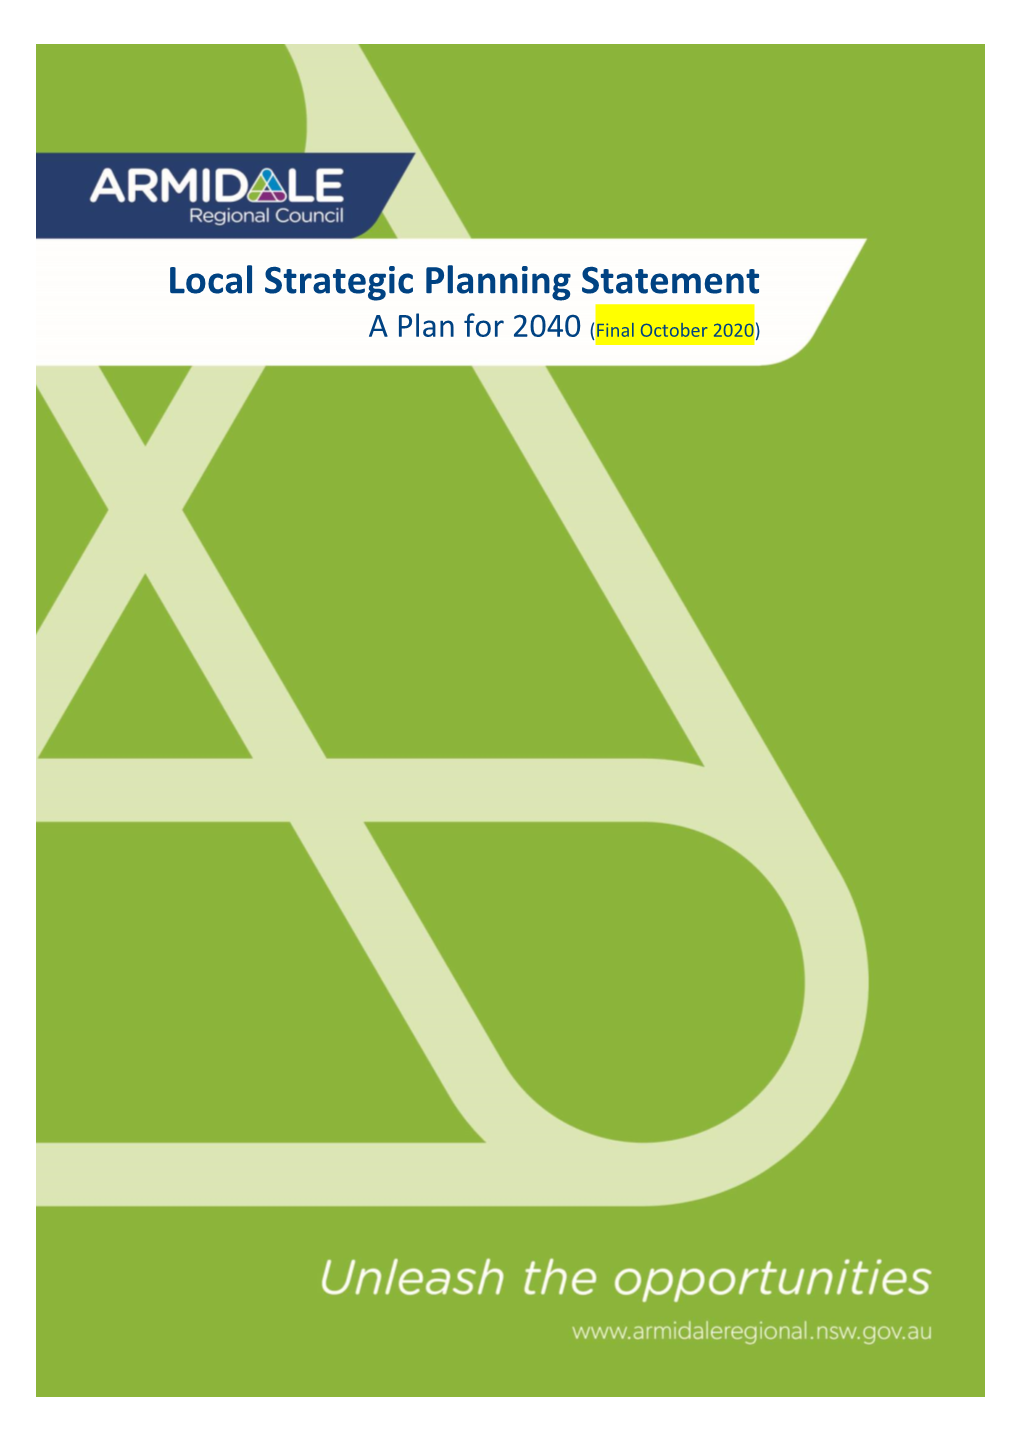 Local Strategic Planning Statement a Plan for 2040 (Final October 2020) TRIM